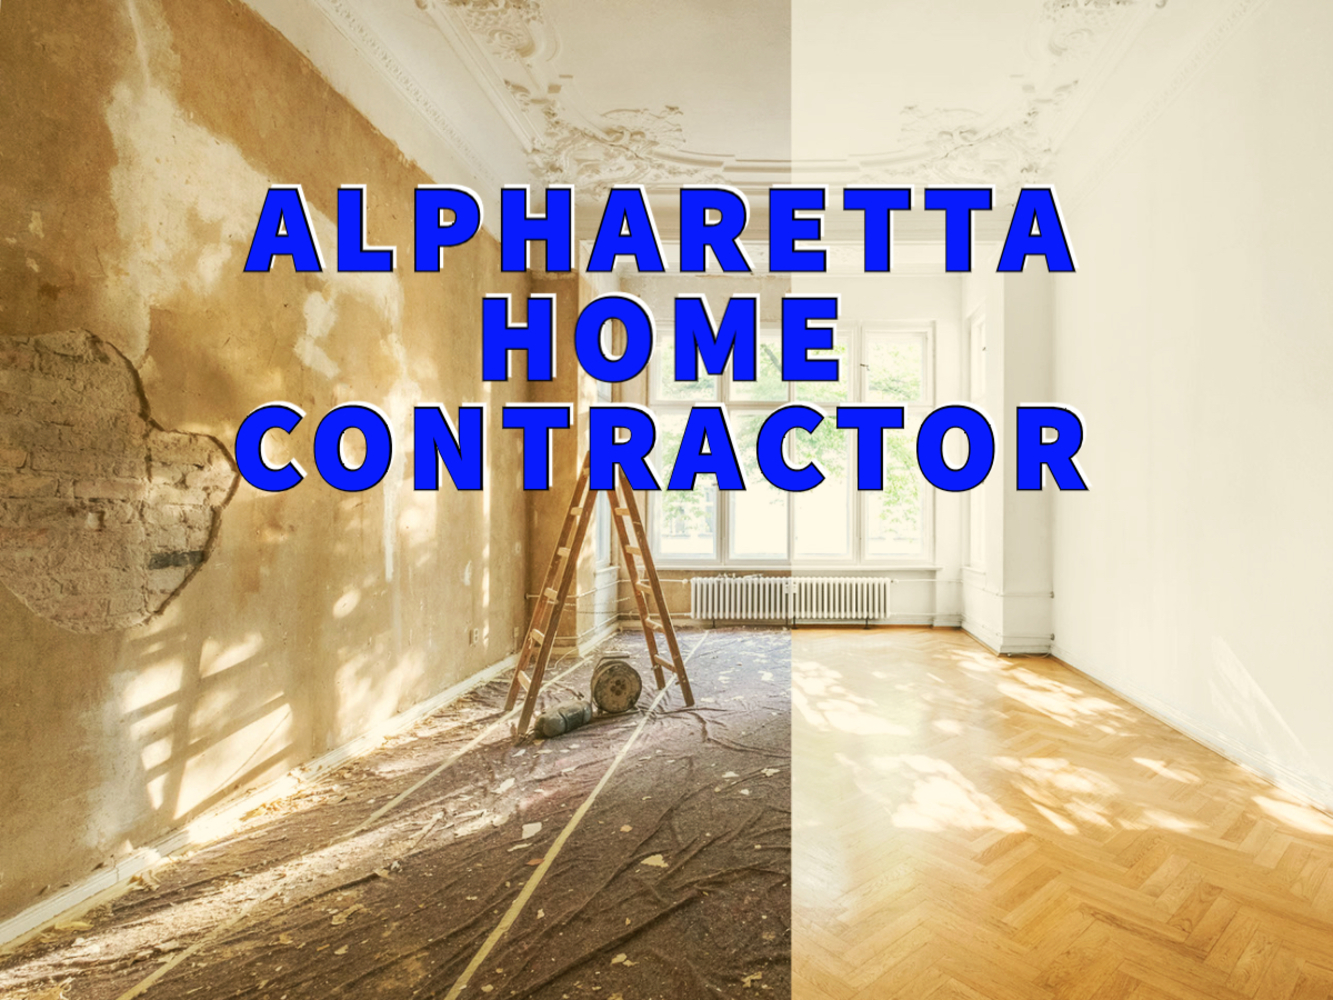 Alpharetta home contractor written in blue over merged photo of before and after interior remodel